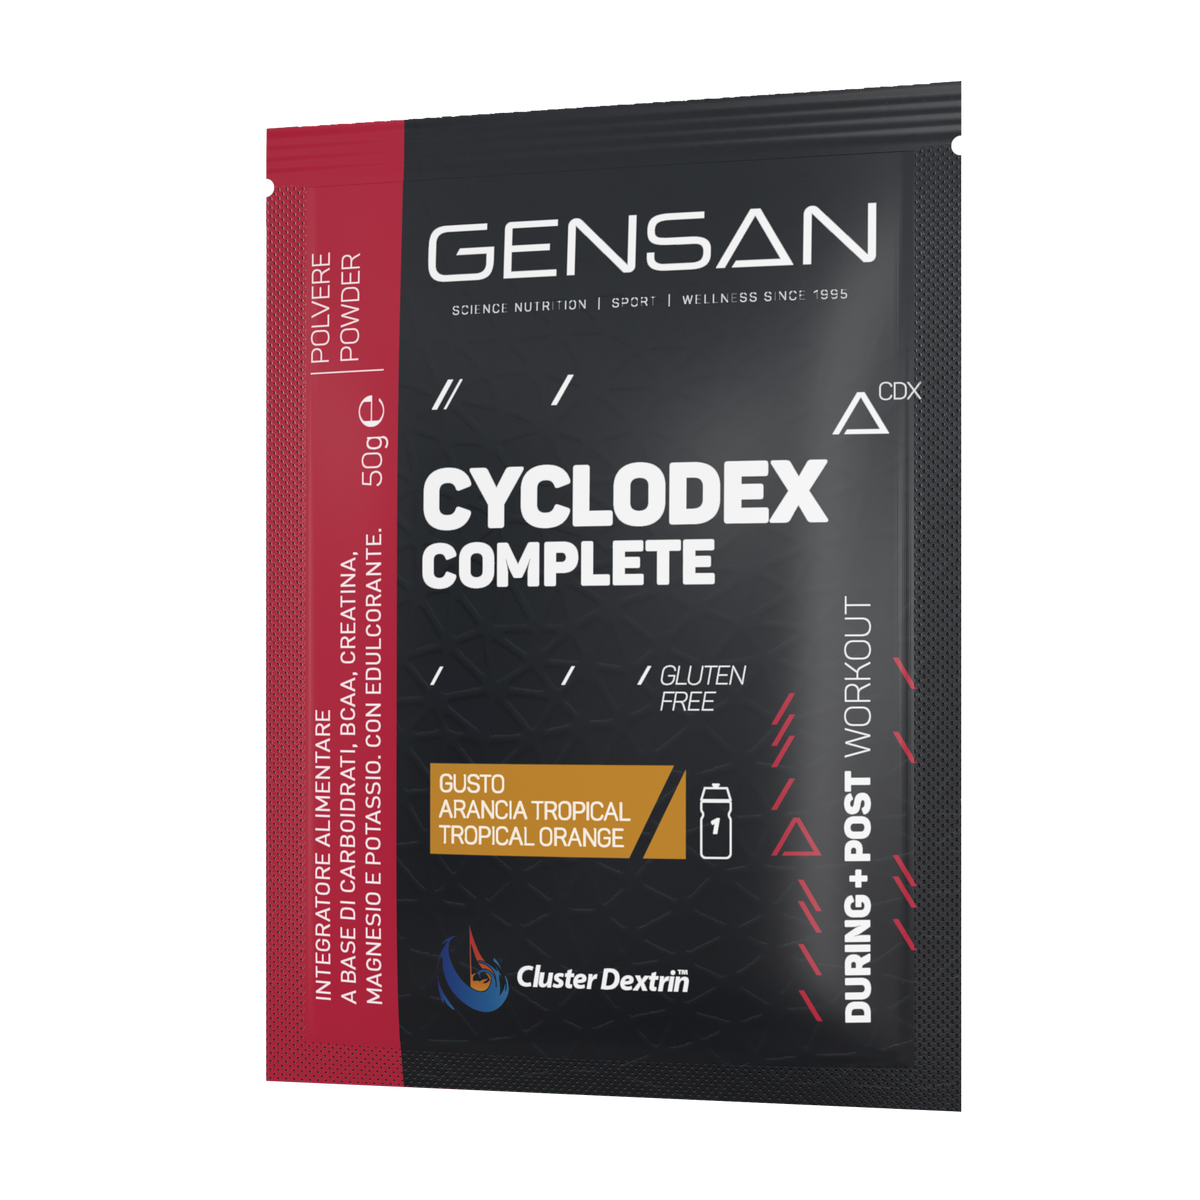 CYCLODEX COMPLETE